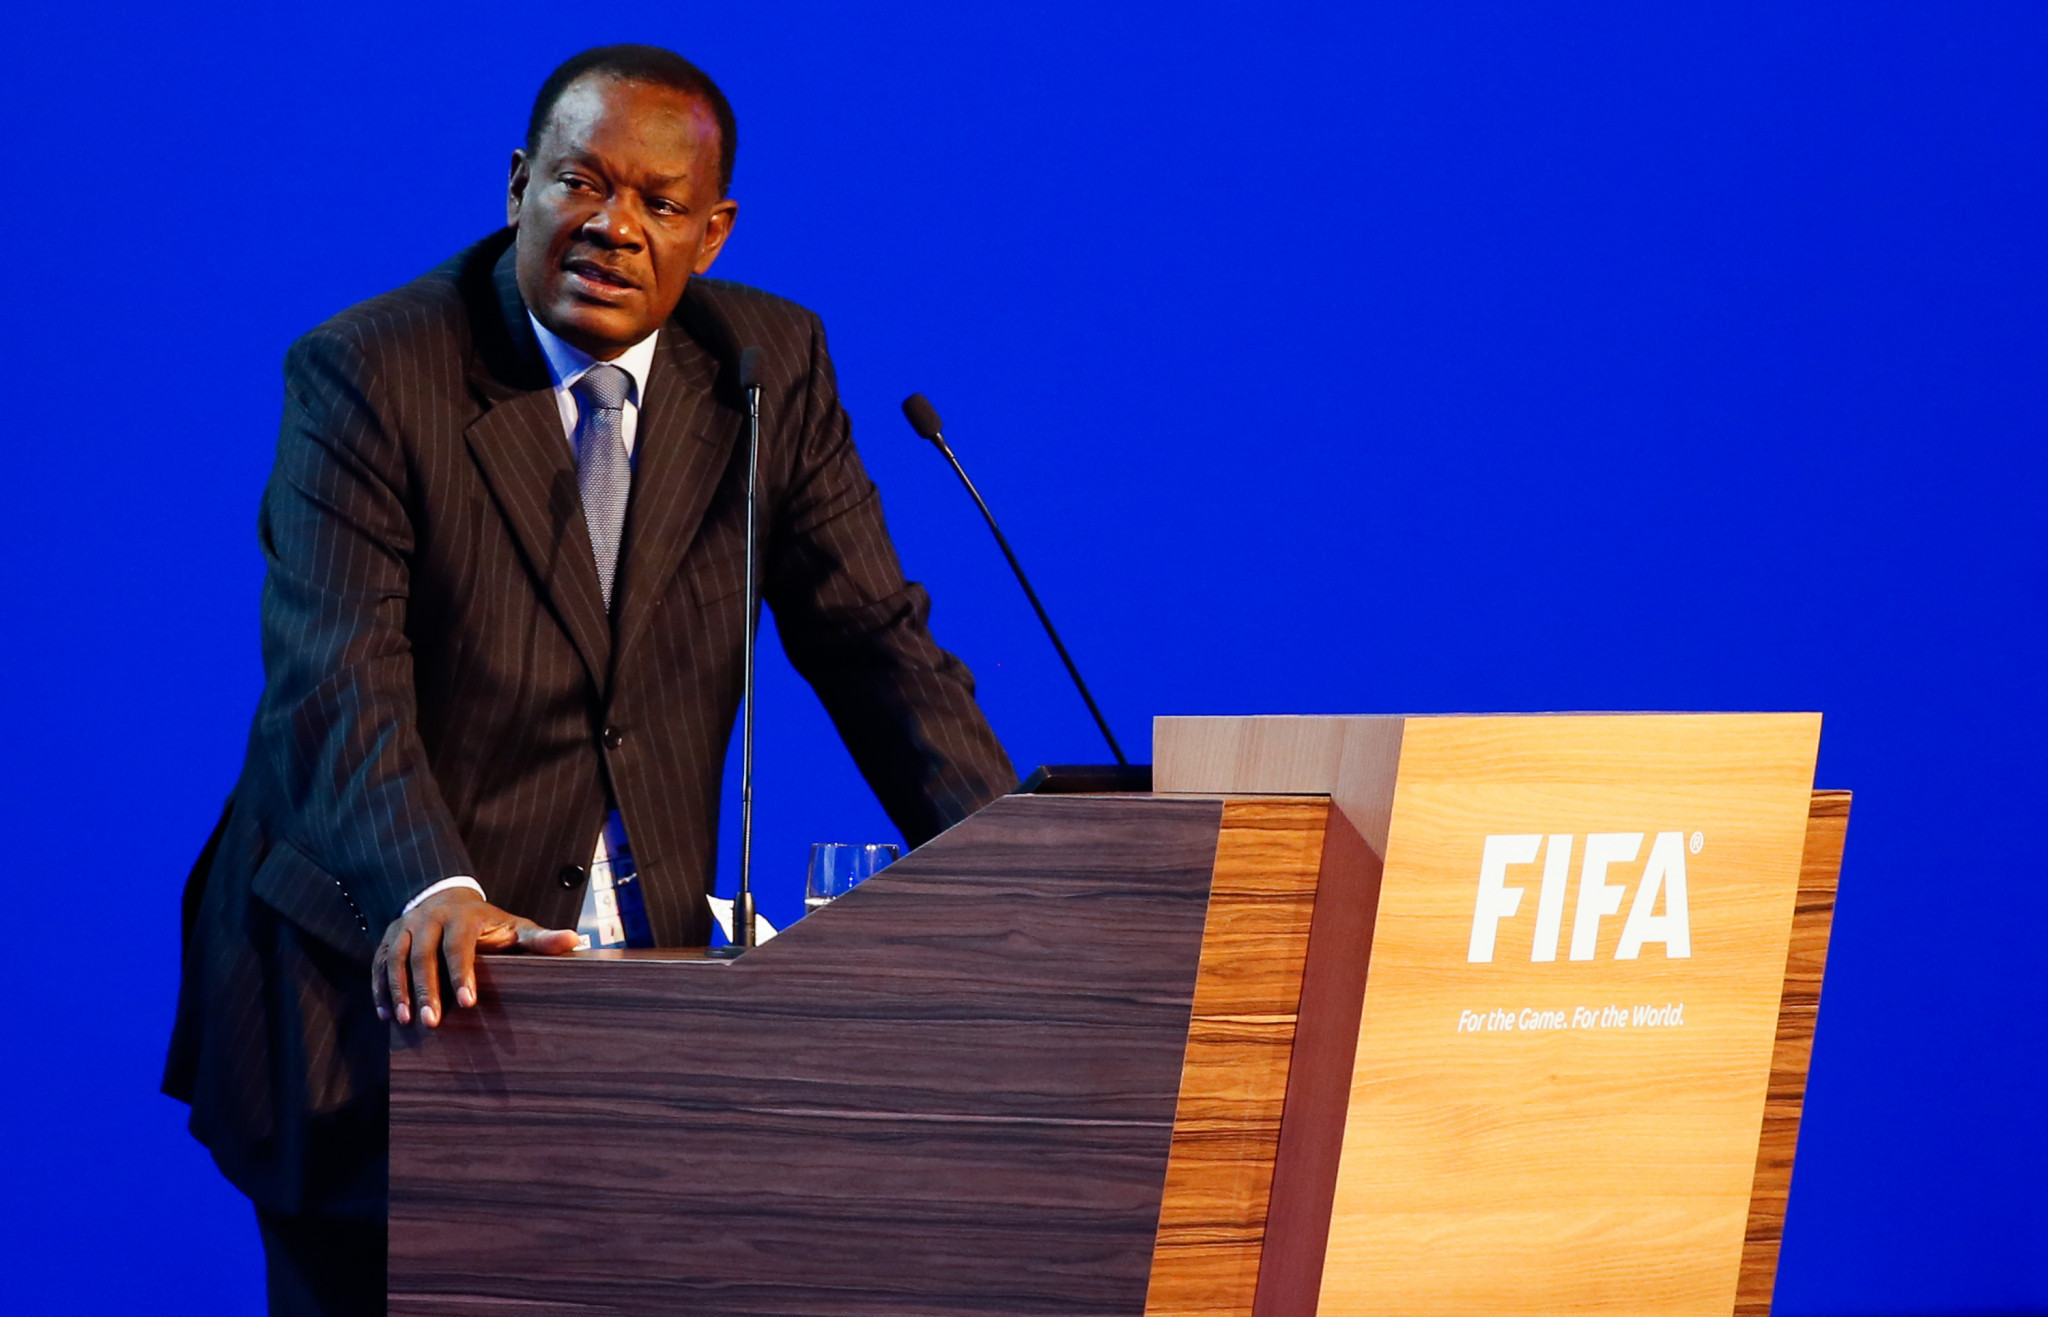 Haitian Football Federation President Jean-Bart banned for life by FIFA over sexual abuse